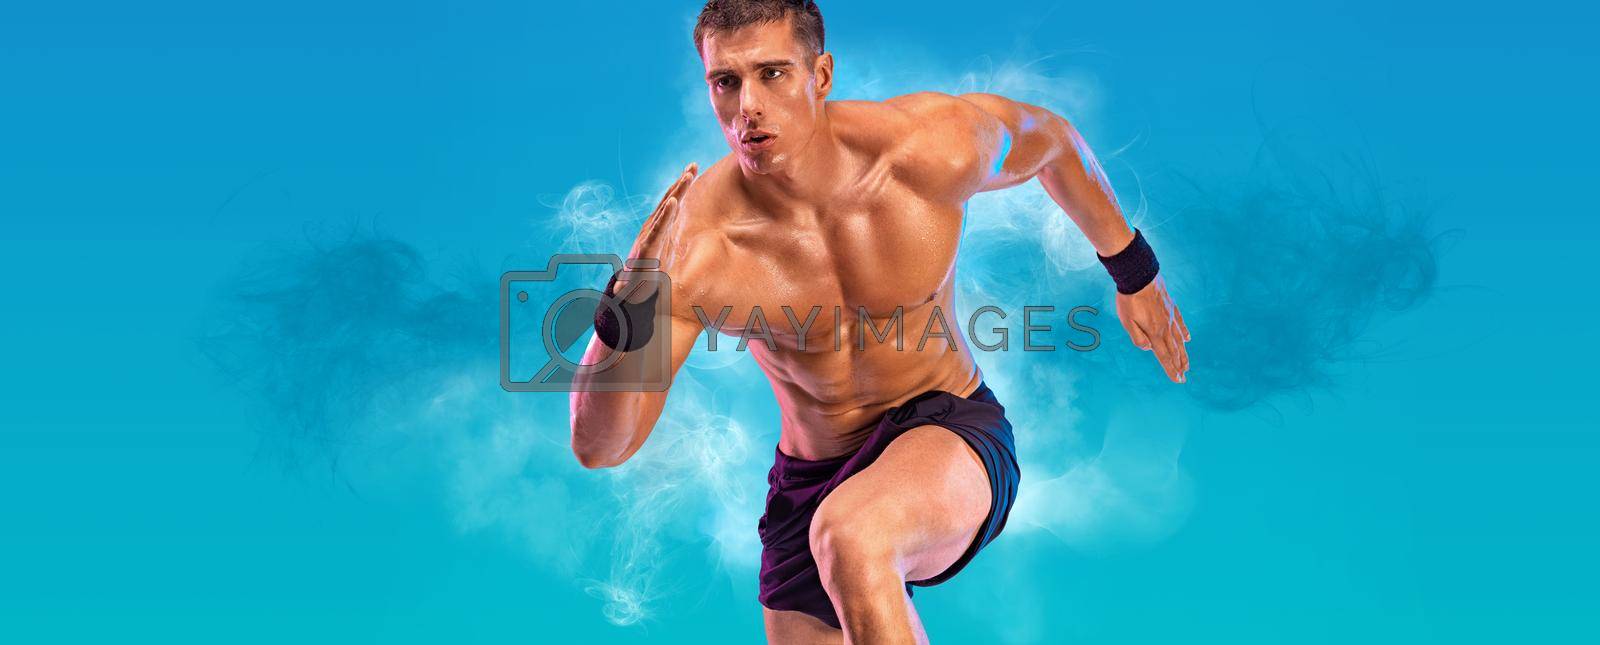 Royalty free image of Runner concept. Athlete sprinter running on blue background. Fitness and sport motivation. Trail run. by MikeOrlov